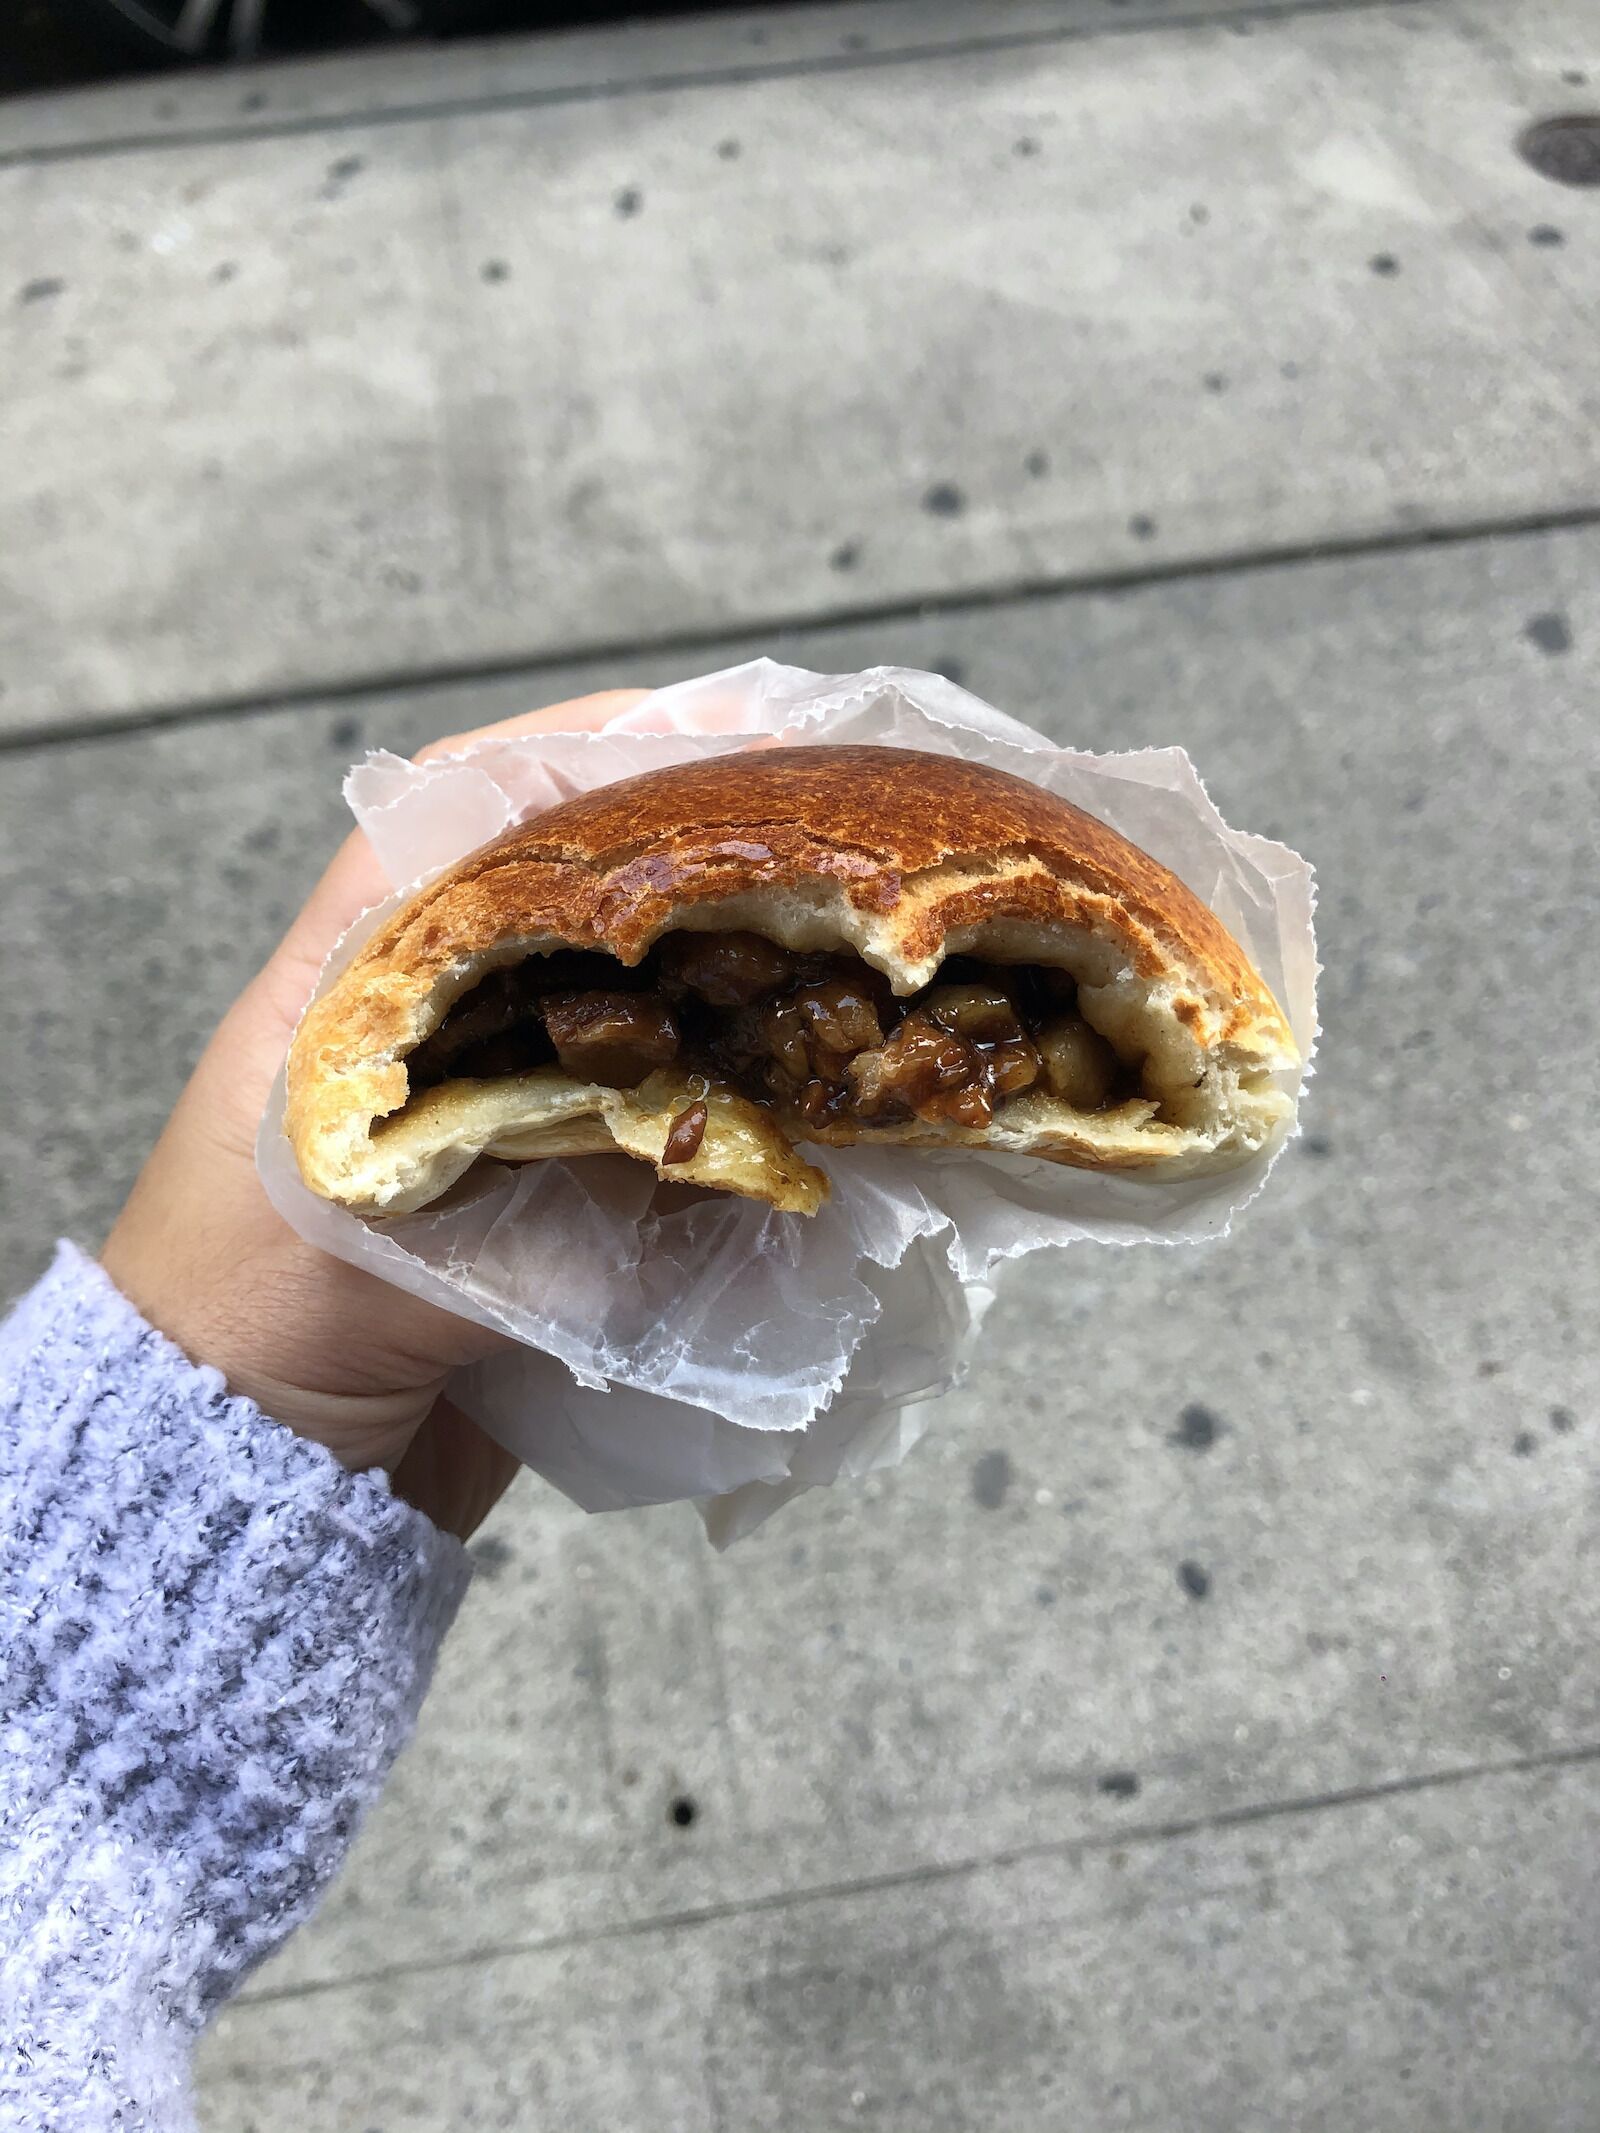 a woman's hand holding a barbecue pork bun with a bite taken out of it from NYC Chinatown neighborhood bakery Mei Lai Wah